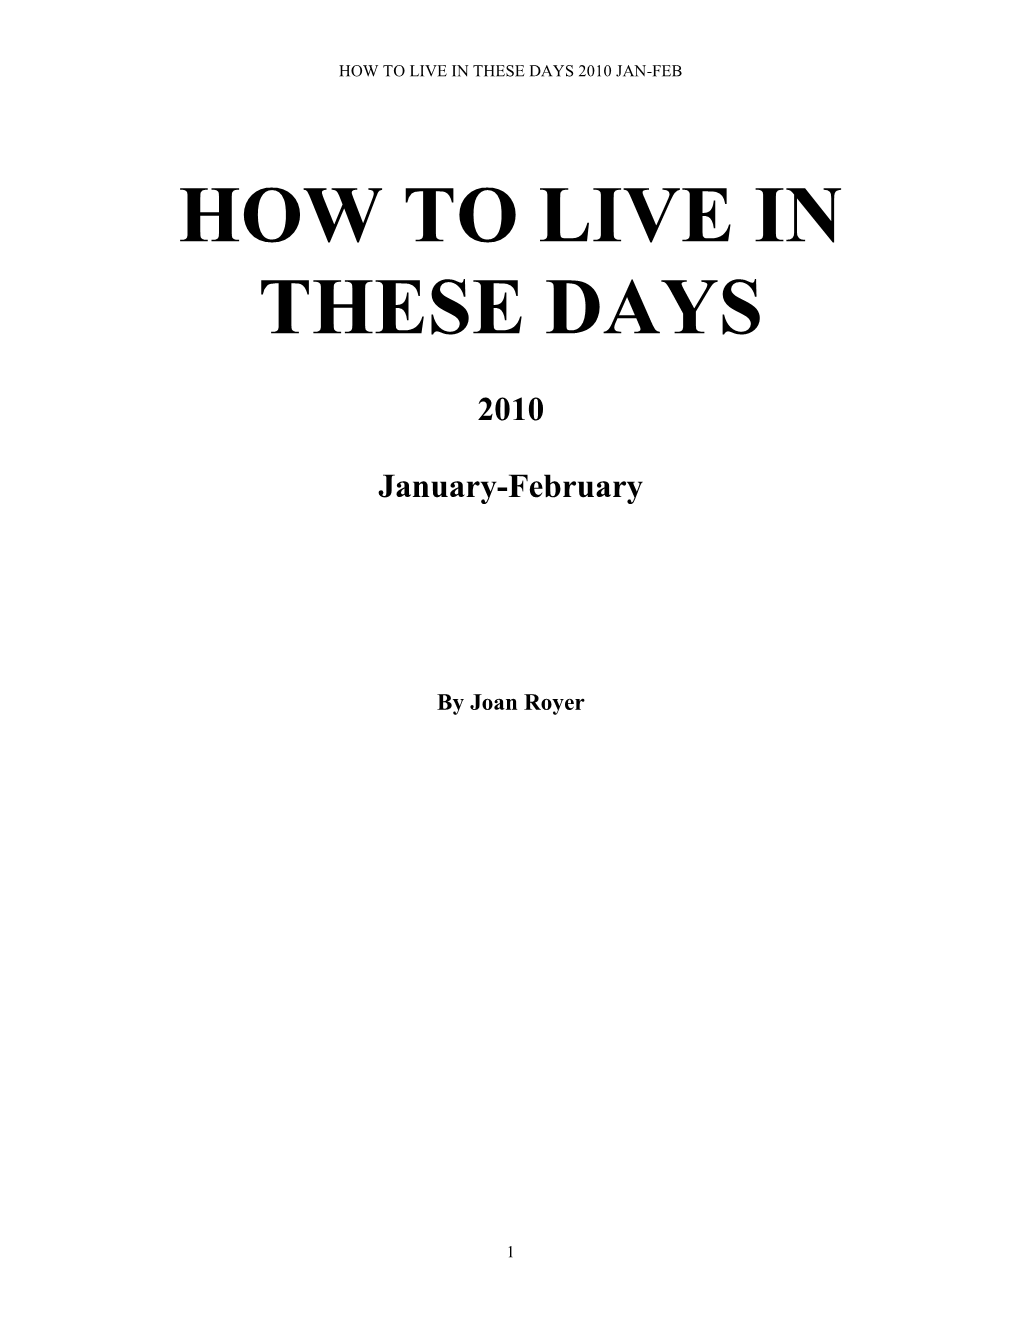 How to Live in These Days 2010 Jan-Feb